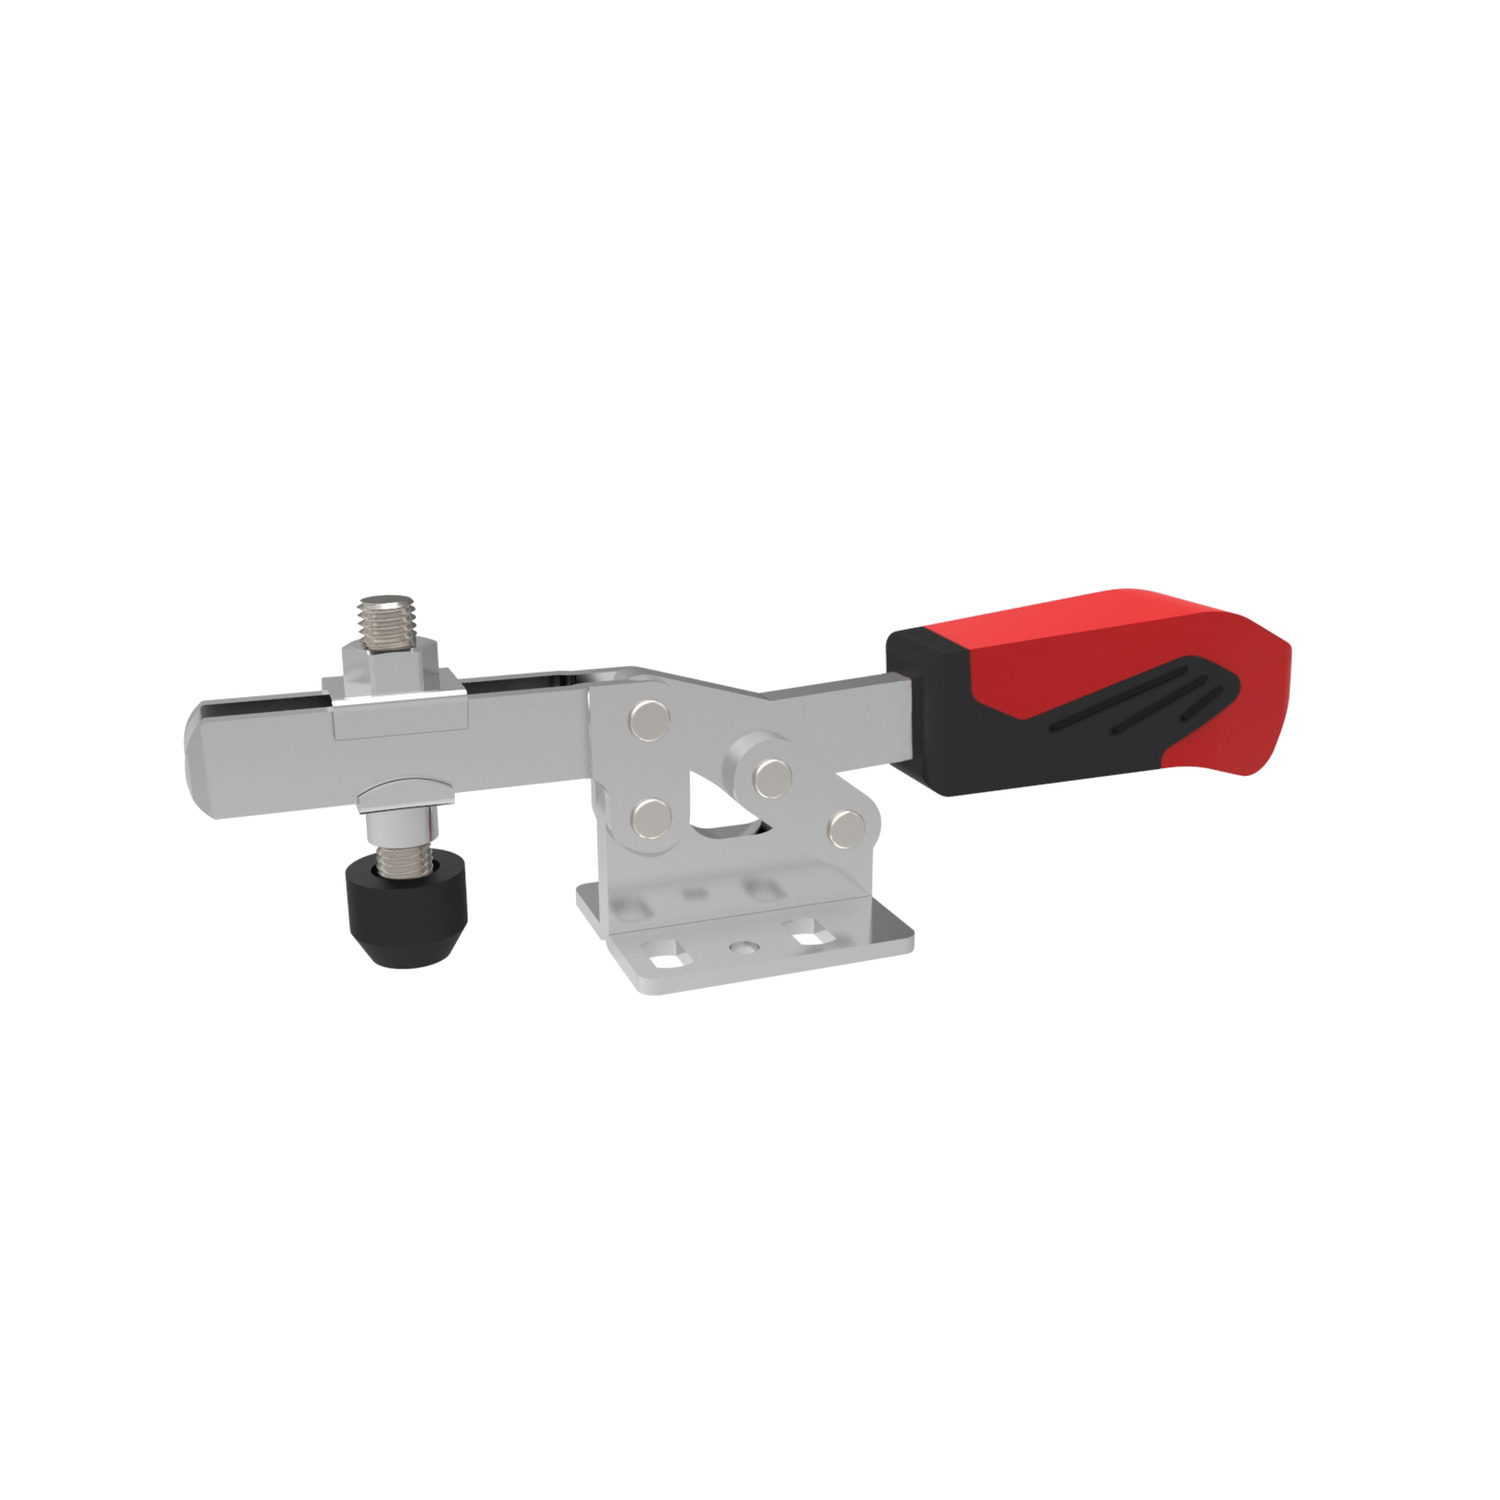 Steel Horizontal Acting Toggle Clamps Horizontal acting toggle clamps made from zinc plated and passivated steel or stainless steel. Bushes are made from case hardened and greased steel. Their easily actuated handles are made from grease resistant plastic.